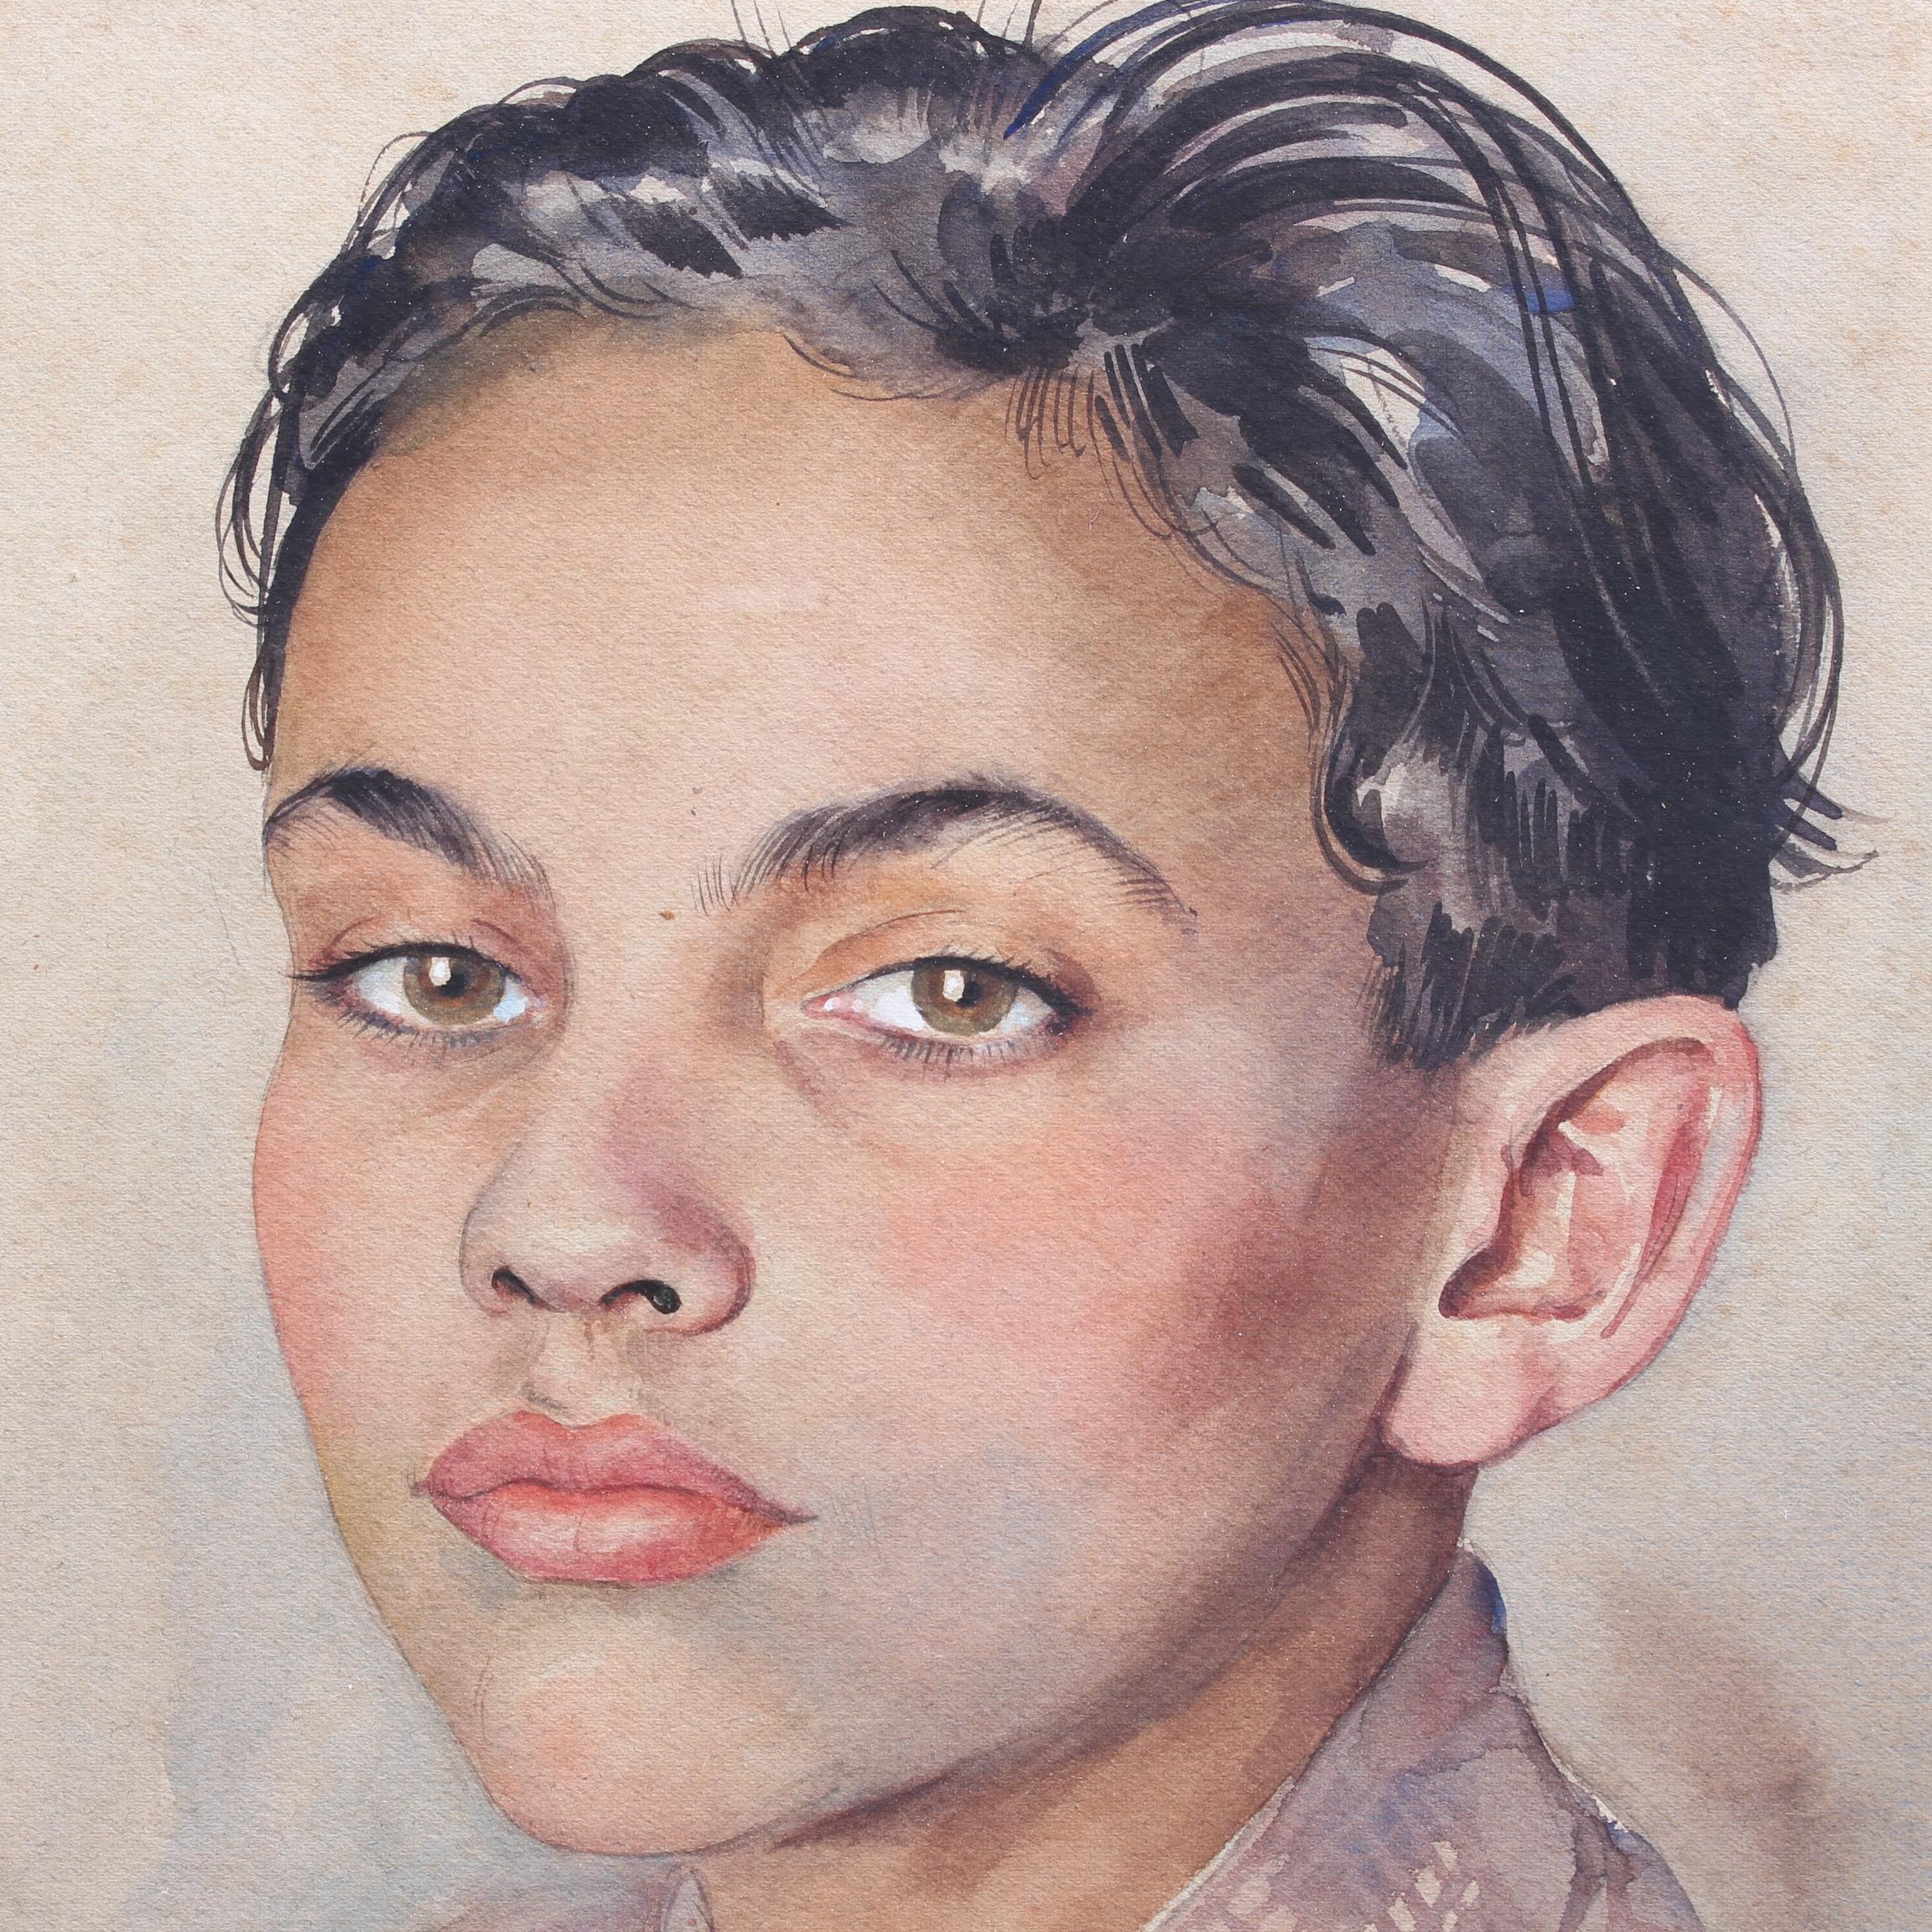 'Portrait of Suited Boy', gouache on fine art paper, by Max Moreau (1943). A fine portrait of a well-to-do boy from the period during WWII. Moreau deftly captured the boy's delicate features and his confident regard - that certain immodest look that